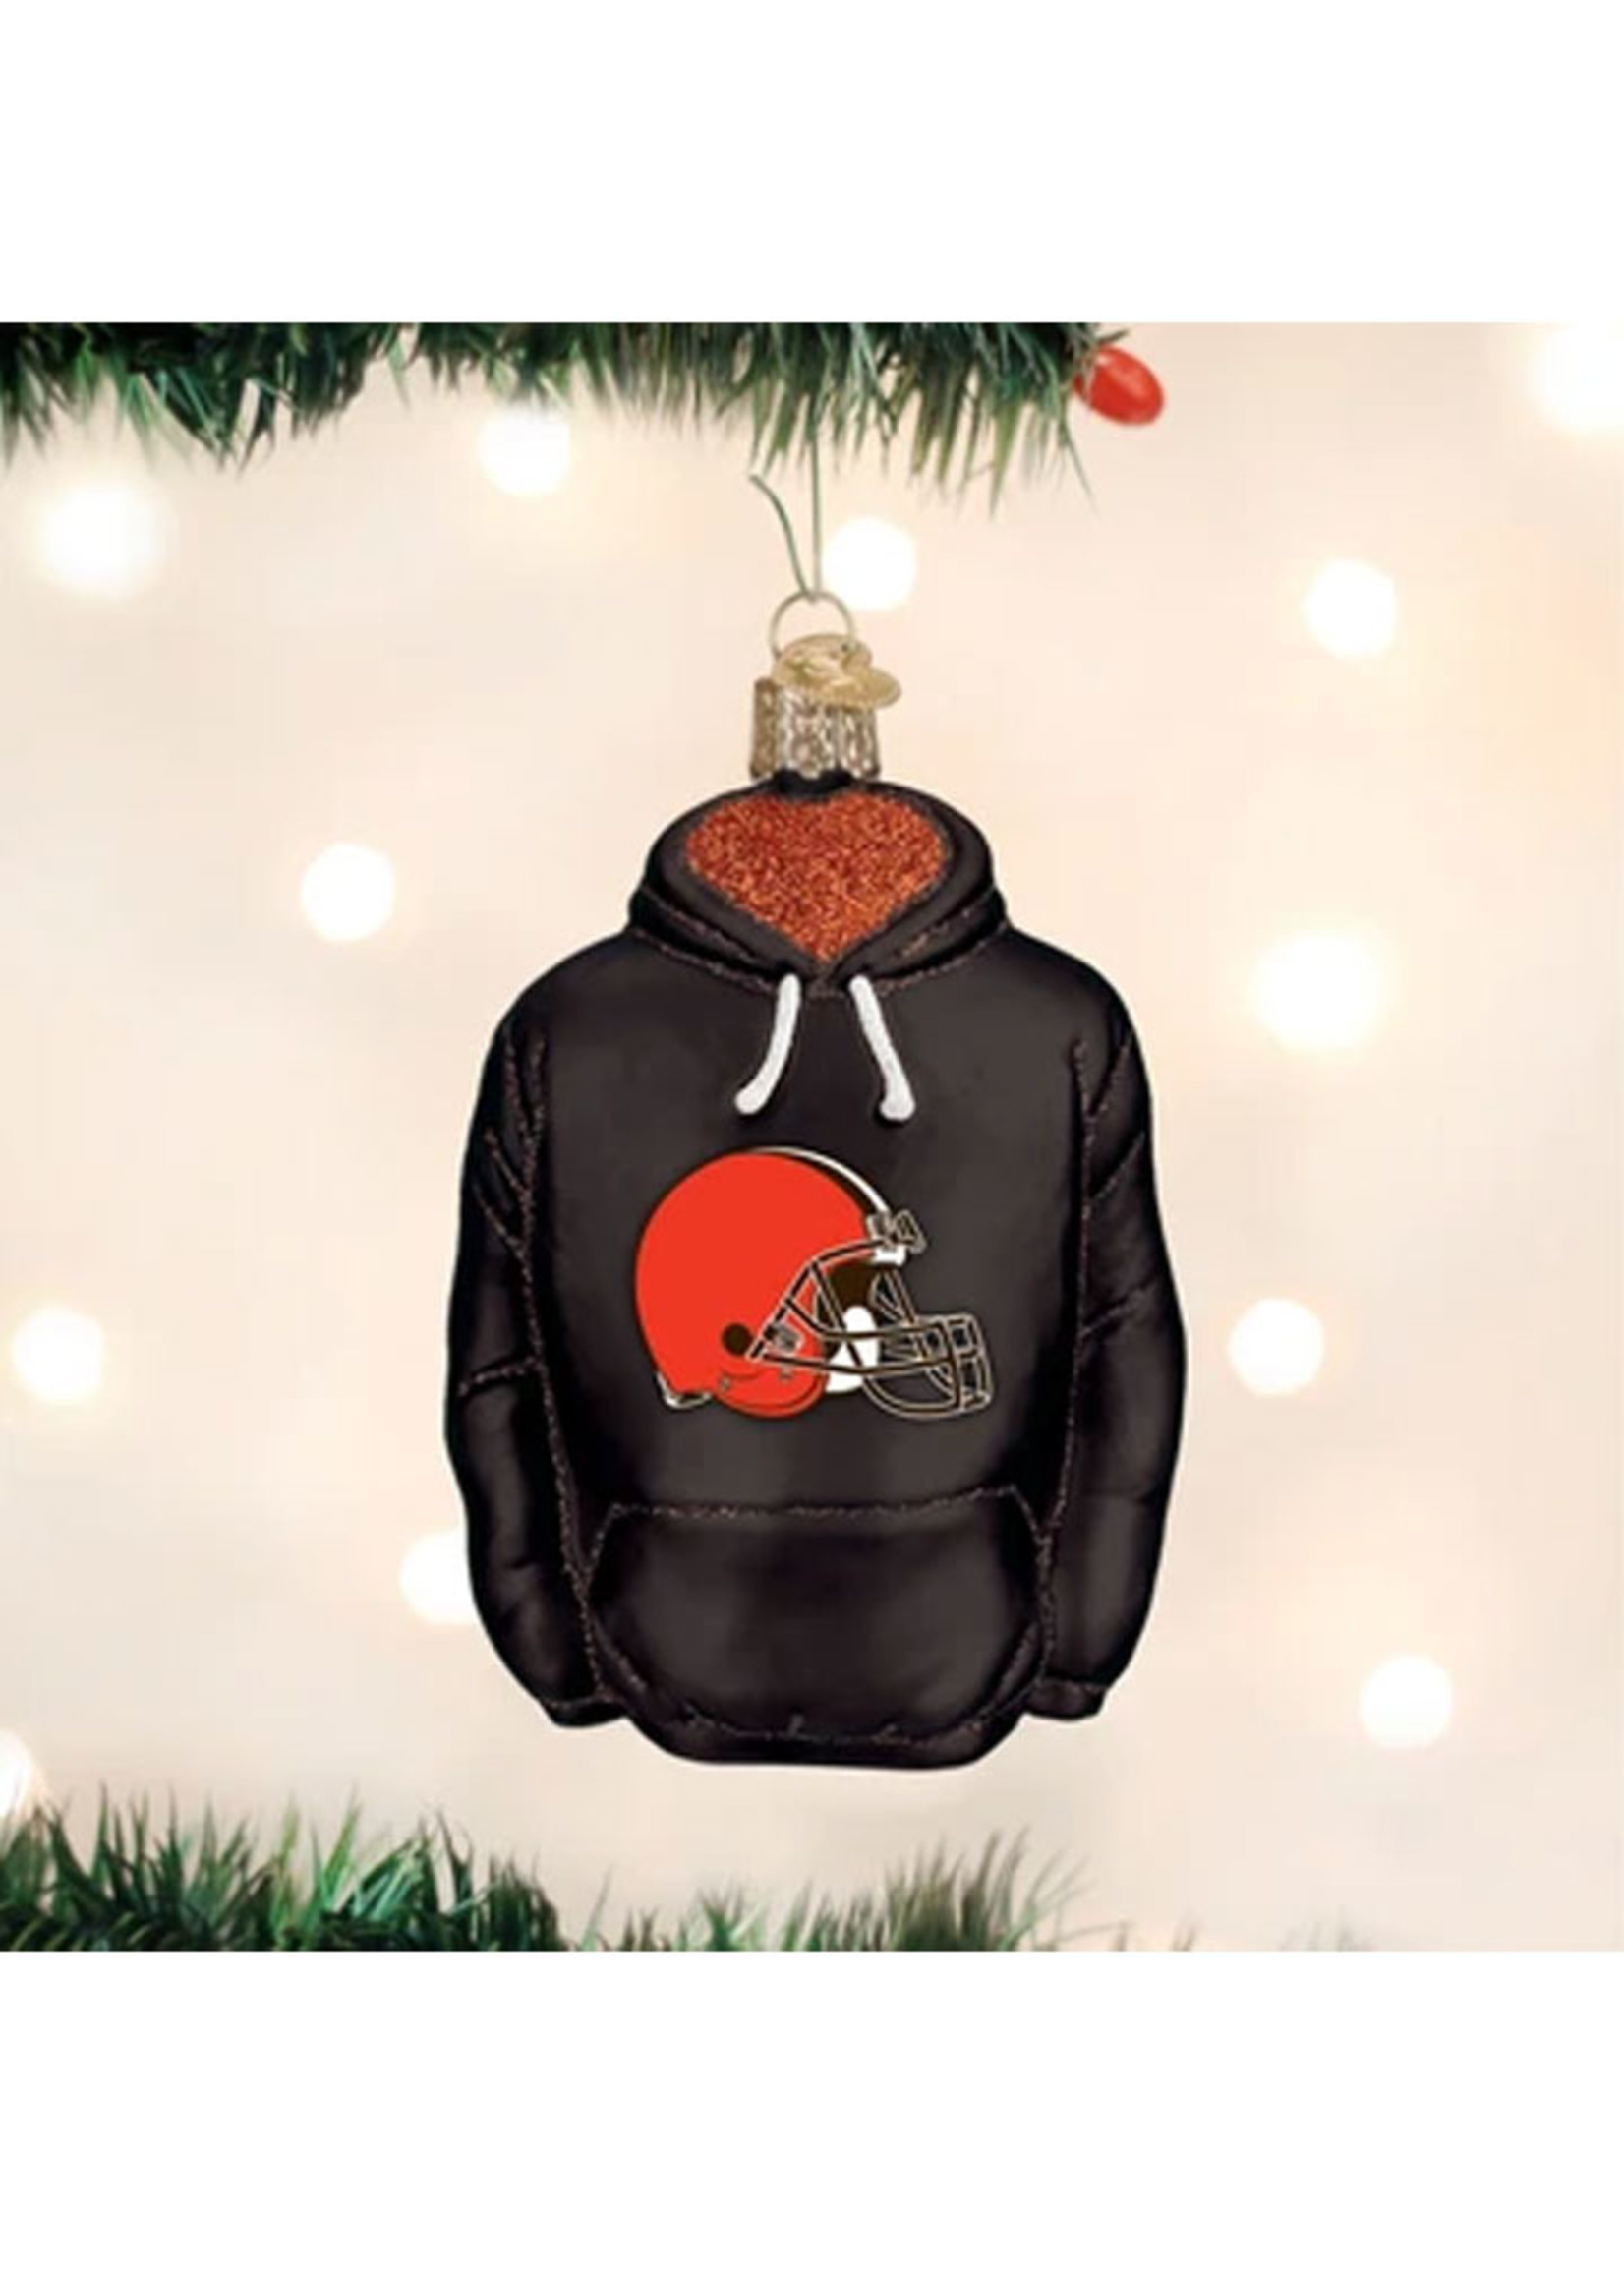 Old World Christmas Cleveland Browns Hoodie Ornament